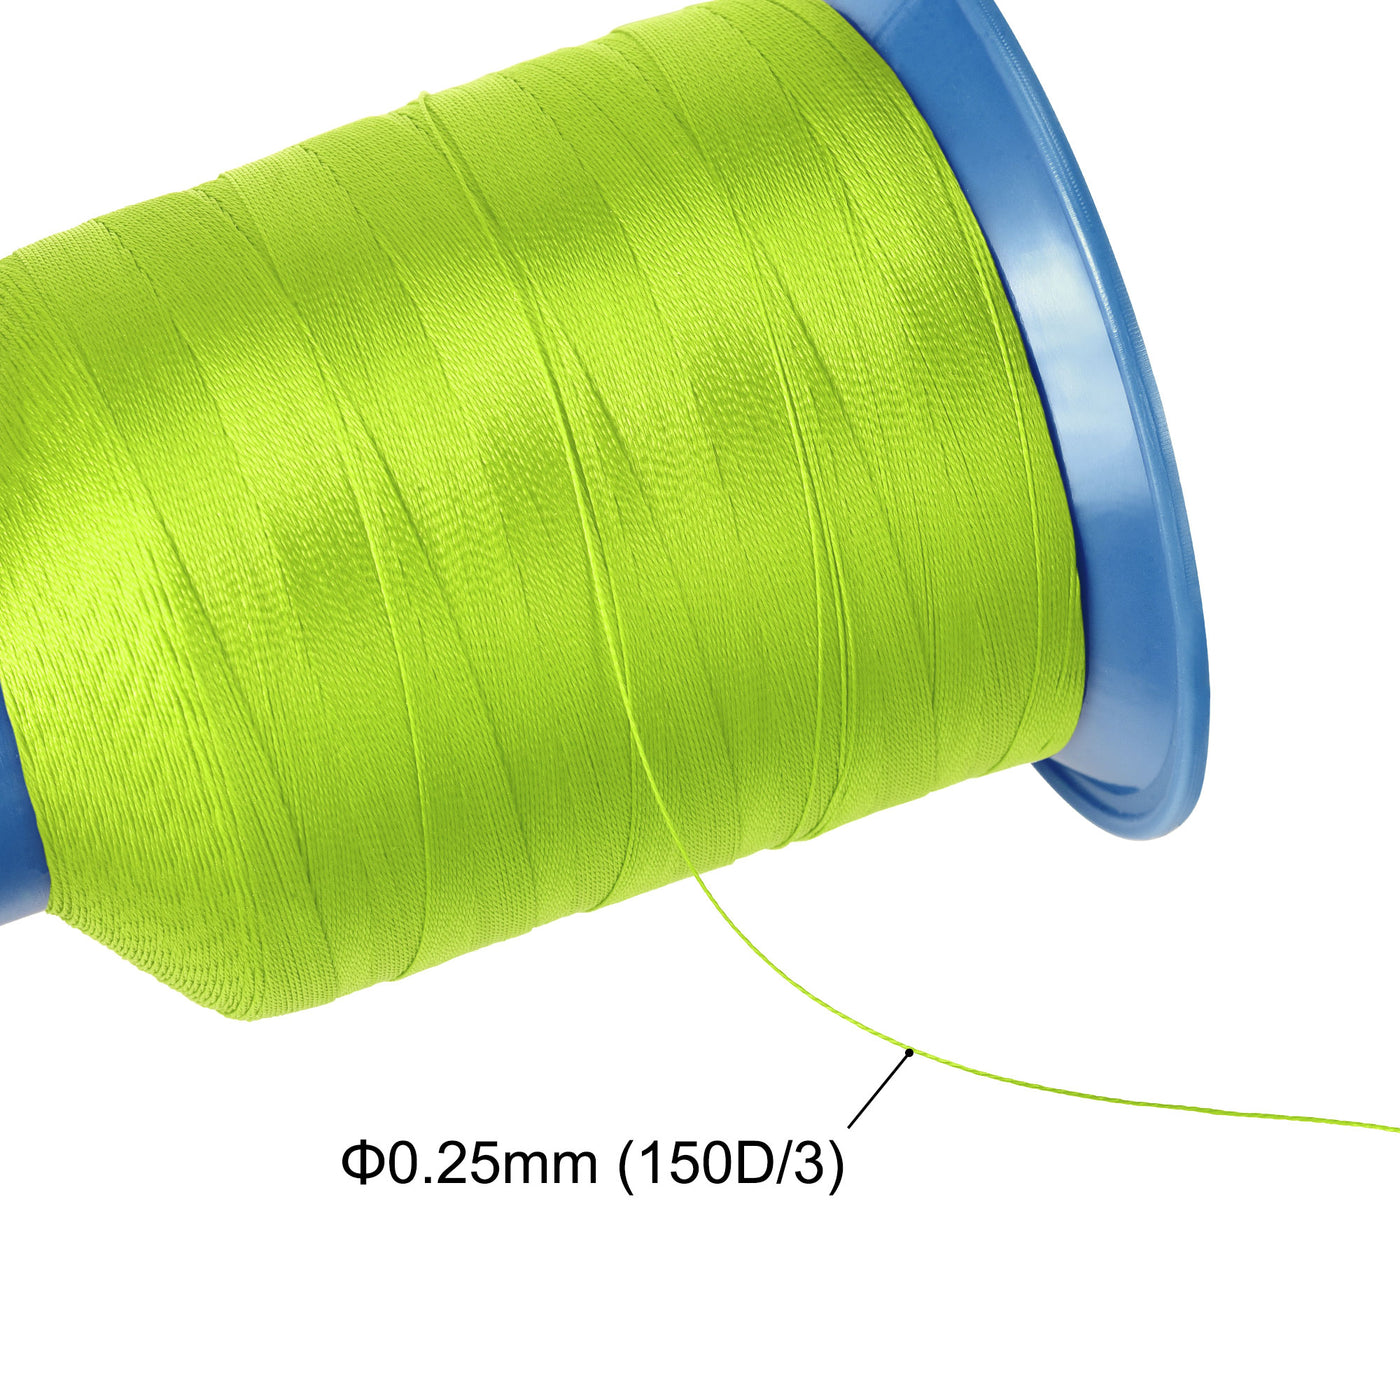 Uxcell Uxcell Bonded Polyester Threads Extra-strong 1968 Yards 150D/0.25mm (Lawn Green, 2pcs)